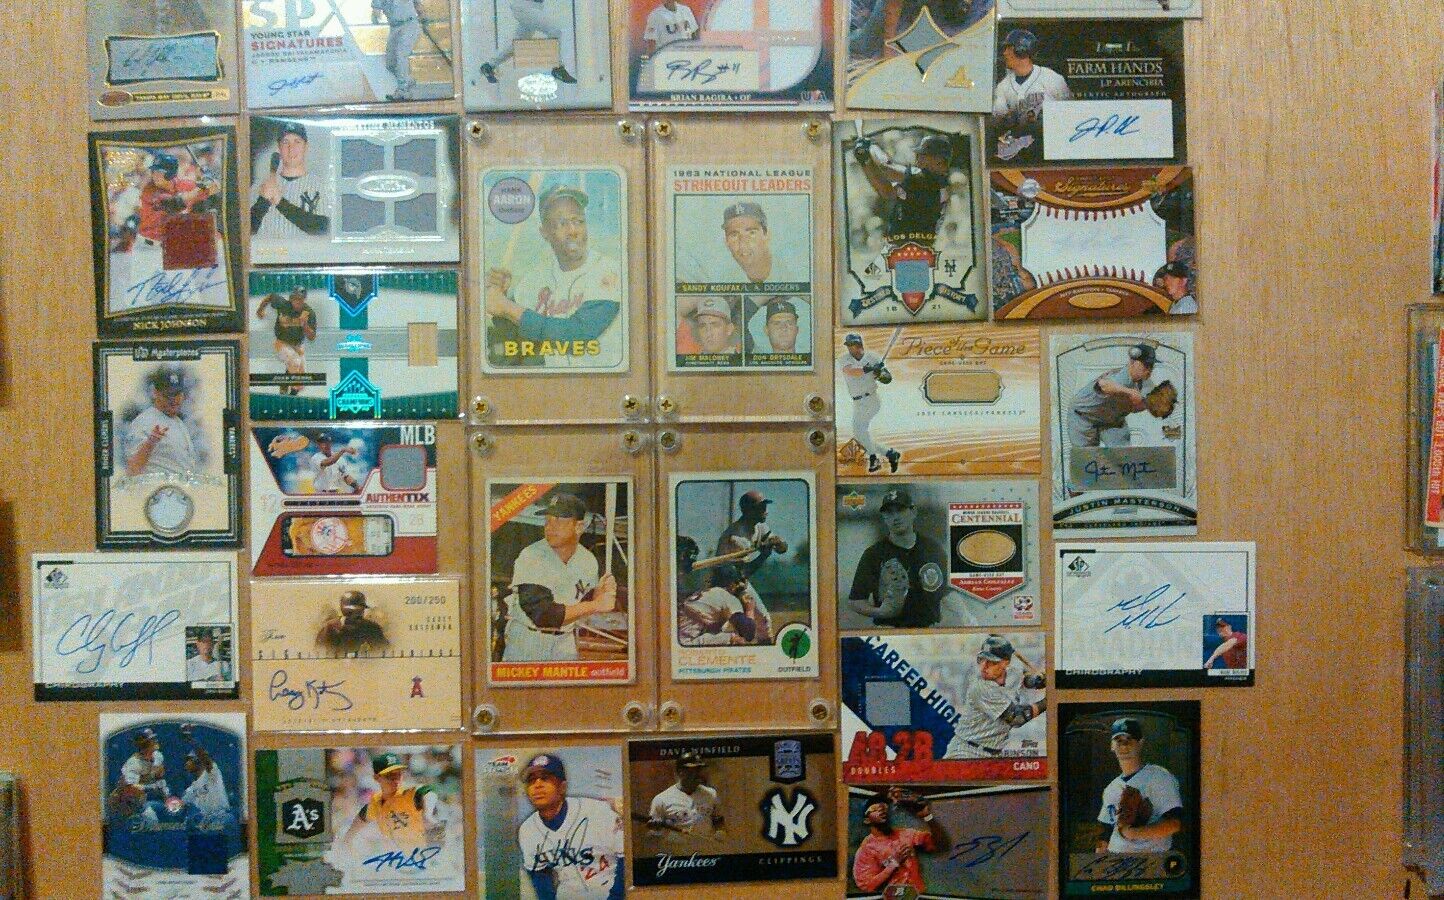 Auto, Patch, Jersey lot, multiple autos, patches,#d cards. Must reduce stock..